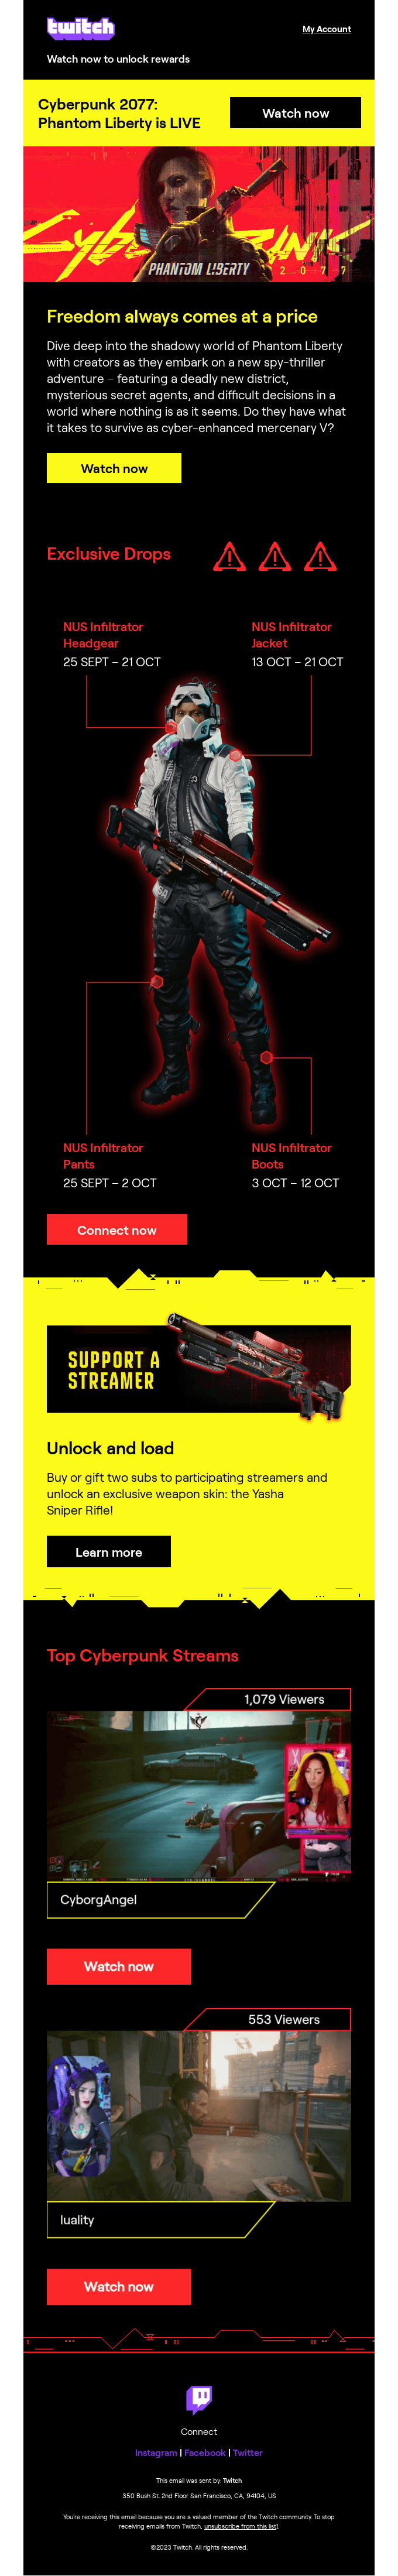 Email from Twitch promoting in-game outfit drops in Cyberpunk 2077 and using a mild sense of urgency